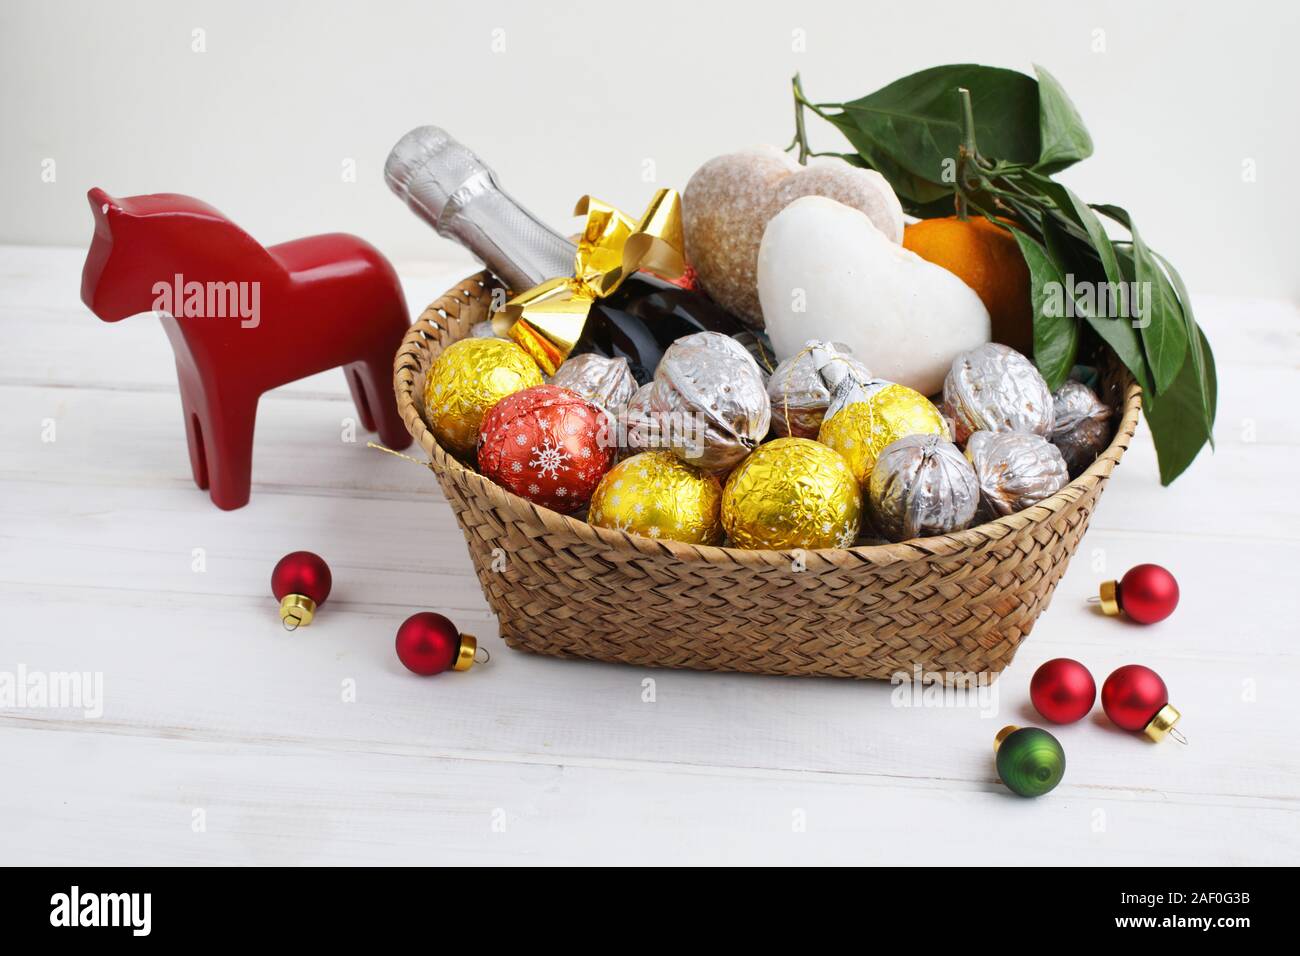 Christmas gift basket with chocolate candies, walnuts, gingerbread, mandarin oranges, a bottle of champagne, and a statue of Swedish Dala horse Stock Photo